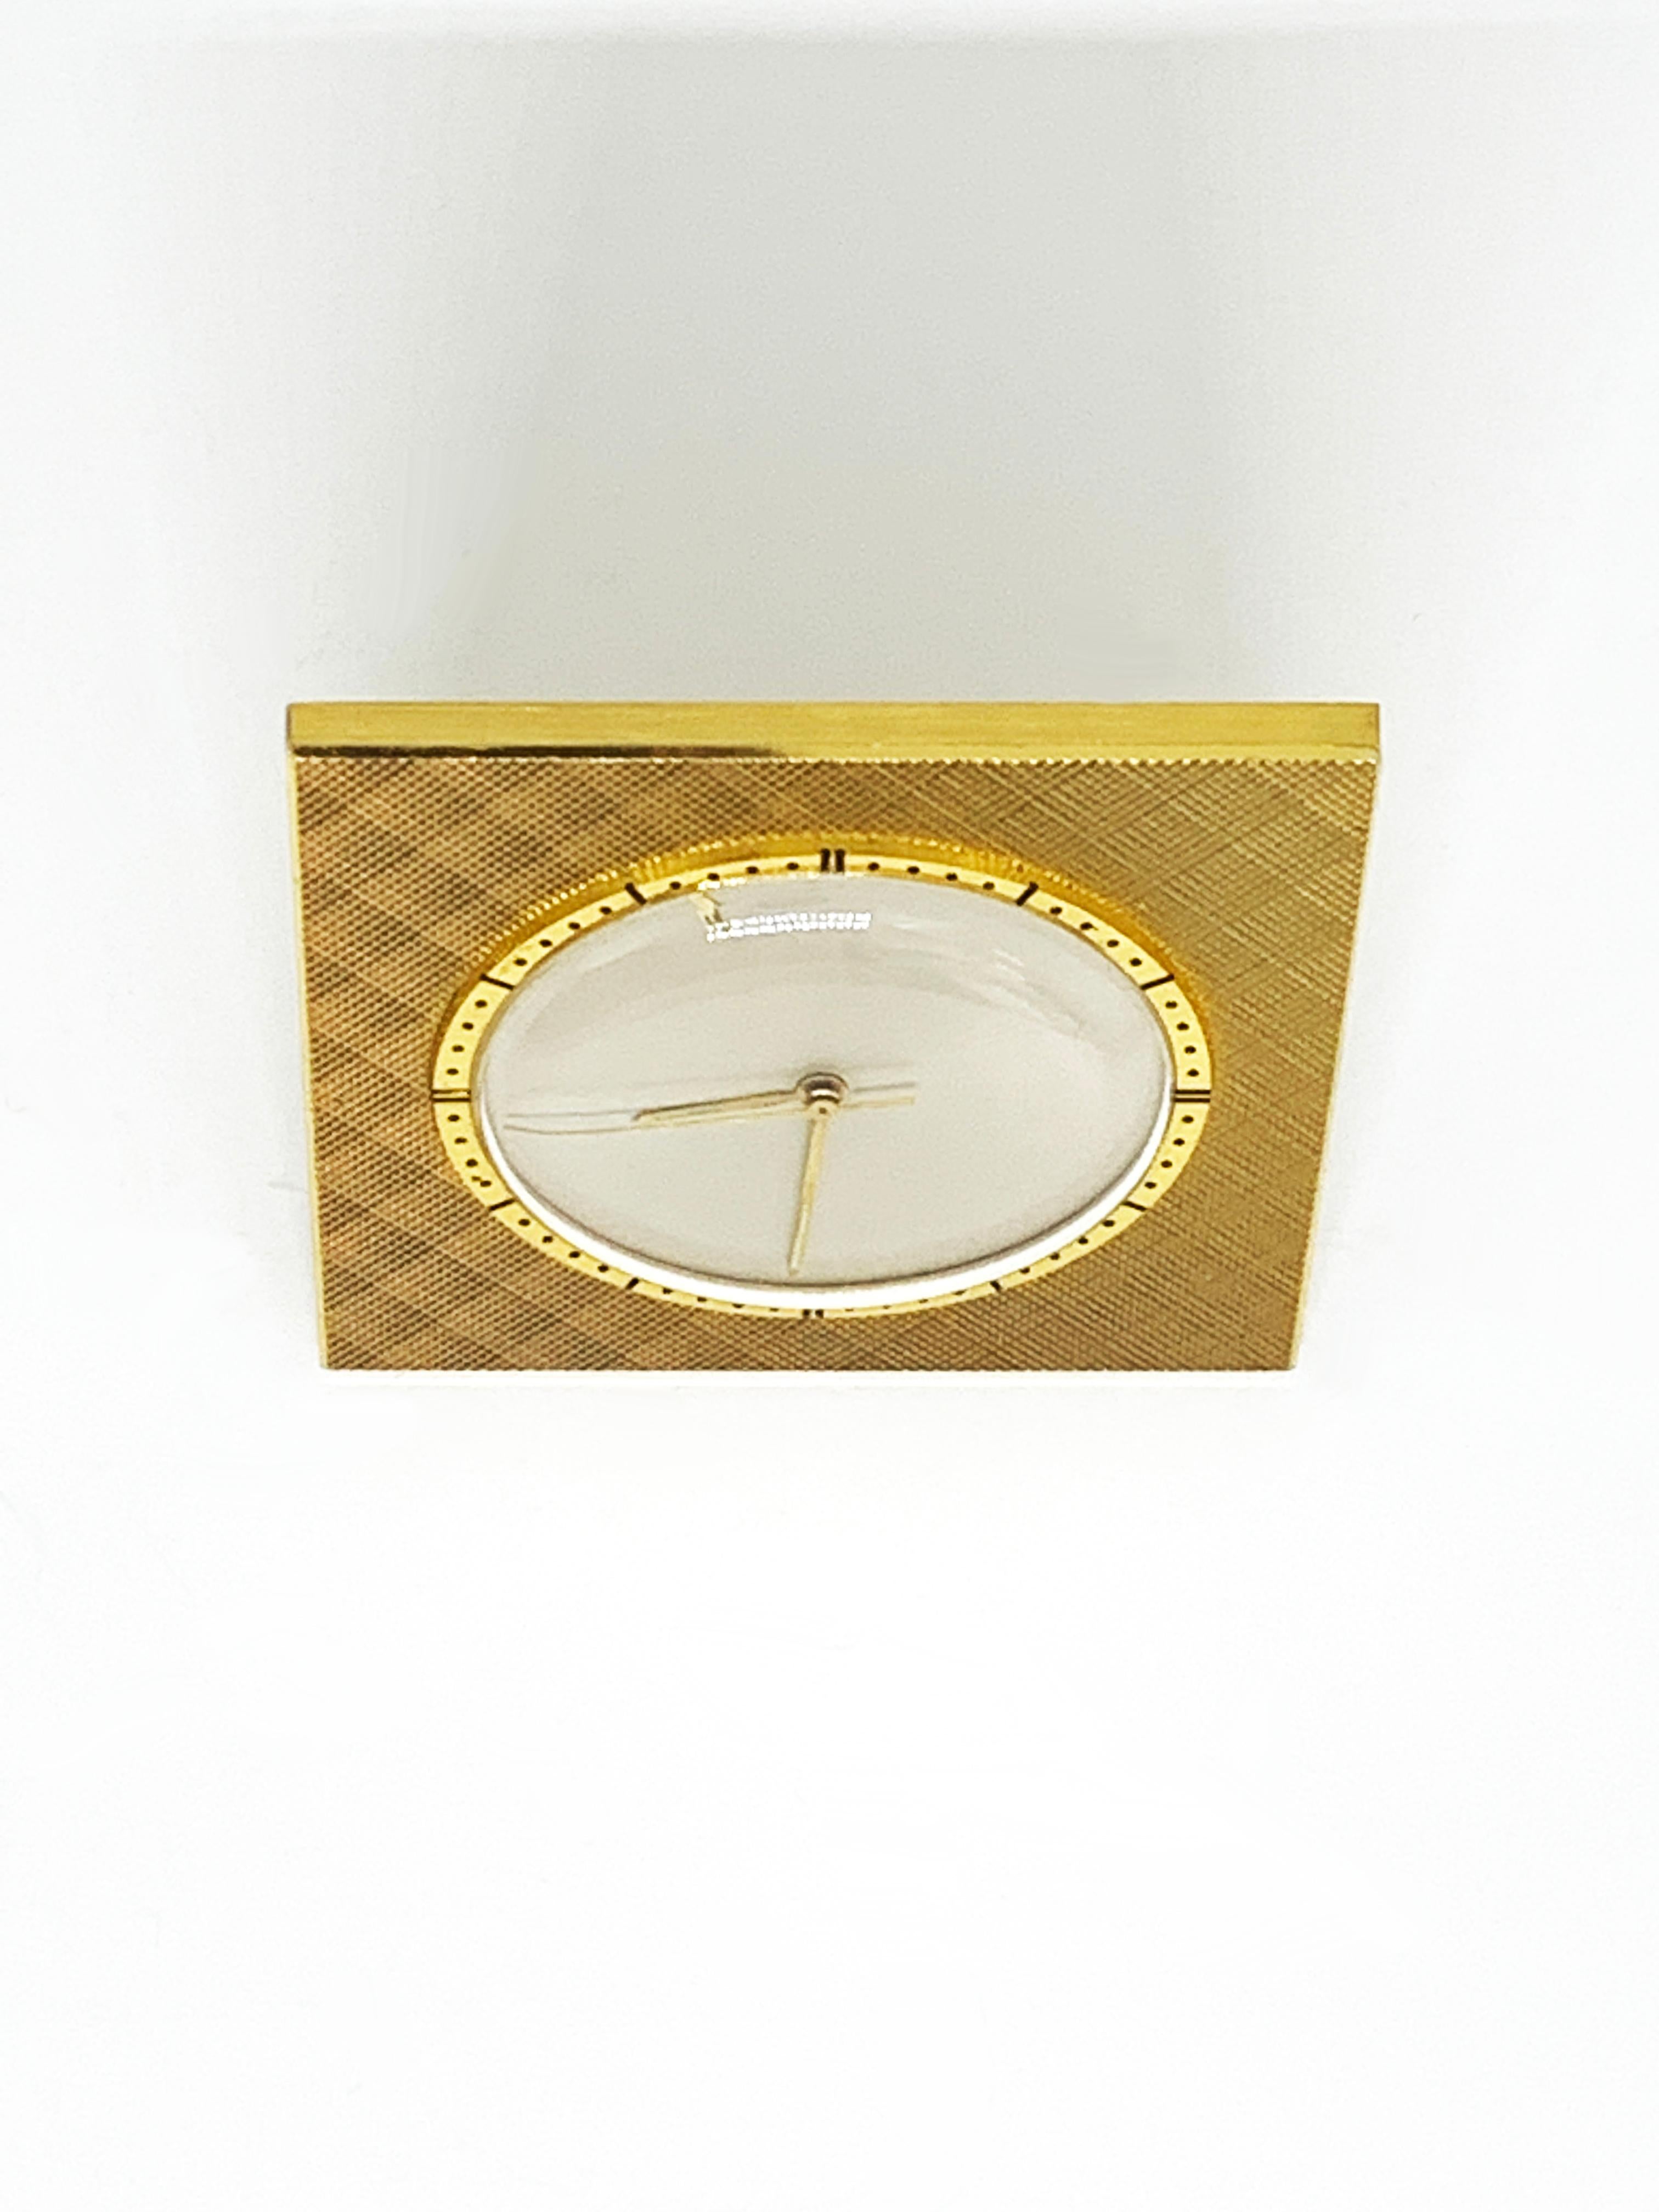 Jaeger-LeCoultre, circa 1966 that has been revised.
Alarm clock
Brass case
mother-of-pearl dial
Mechanical movement with manual winding. Caliber K910
Dim: 44x44mm
dated on the back
Original case - 
very nice condition
980 euros